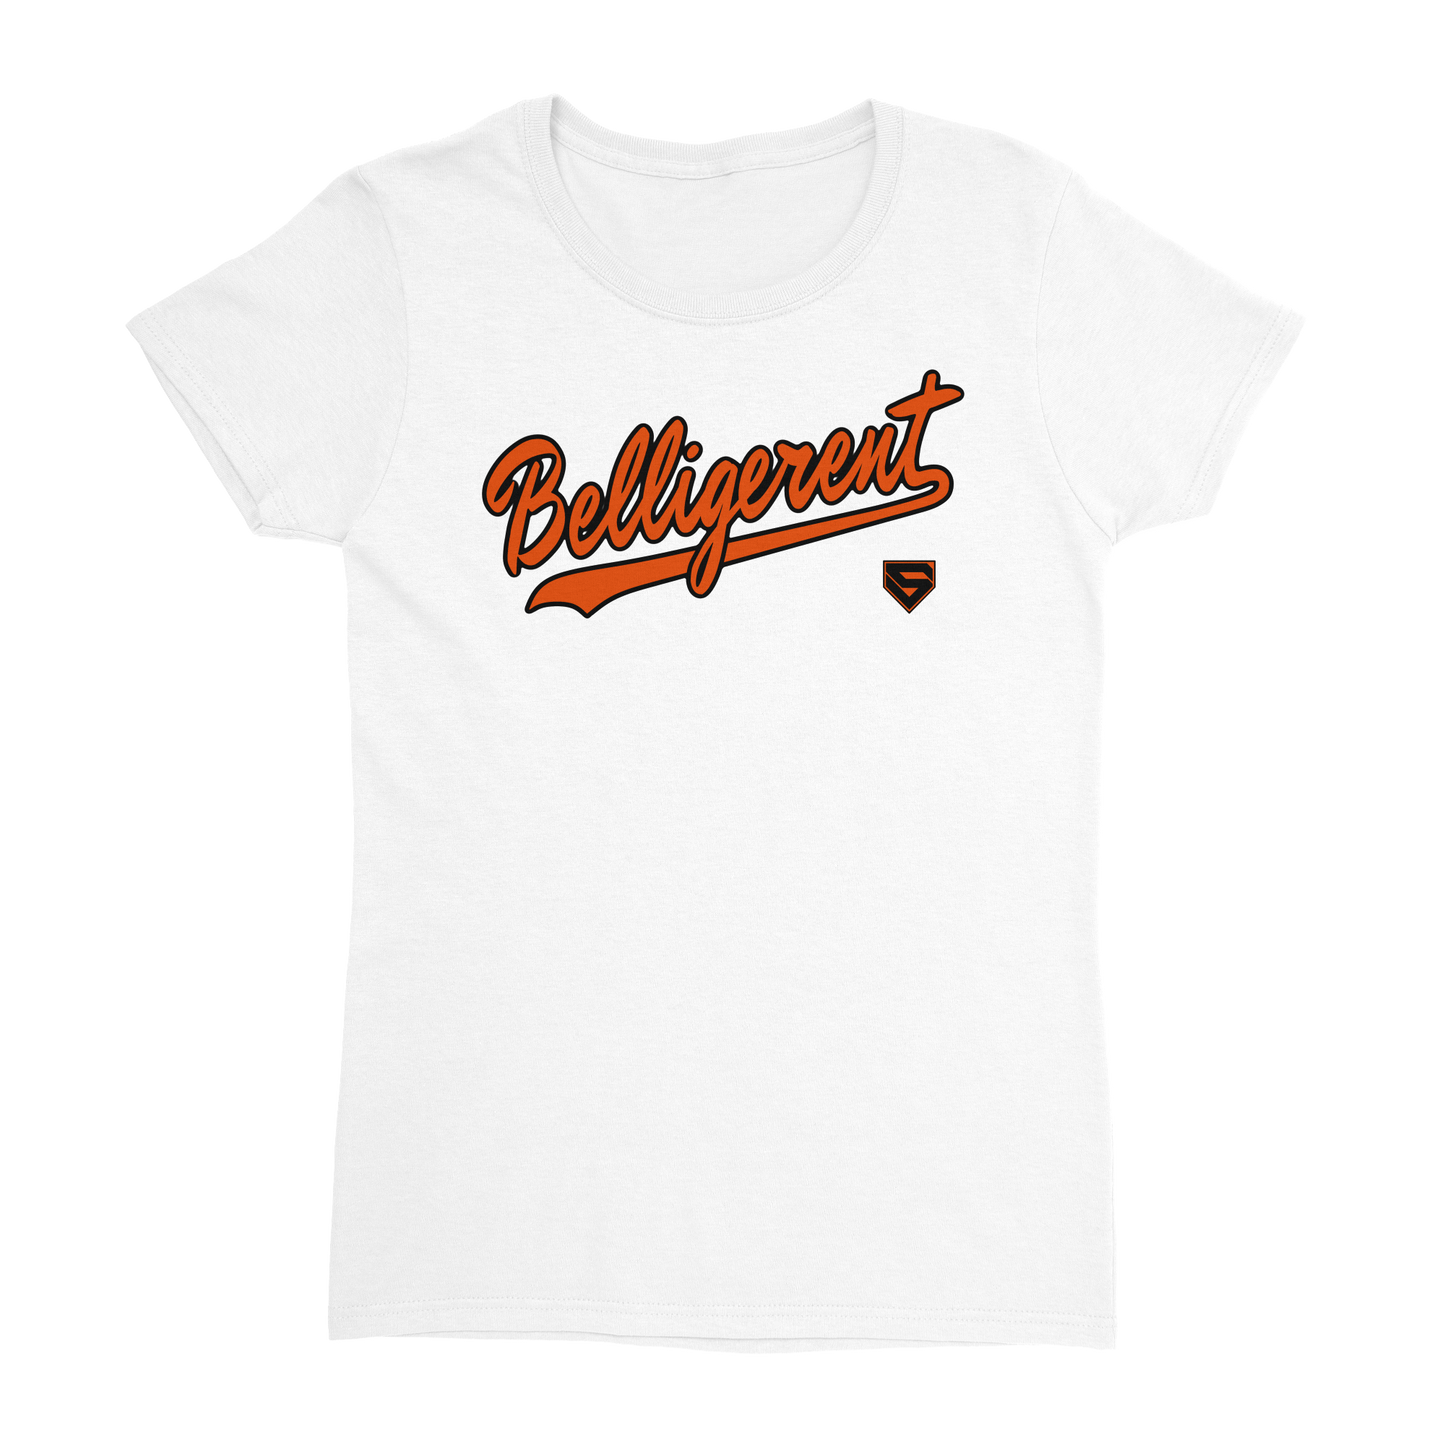 Belligerent Shirsey Women's Tee from Seamheaded Apparel